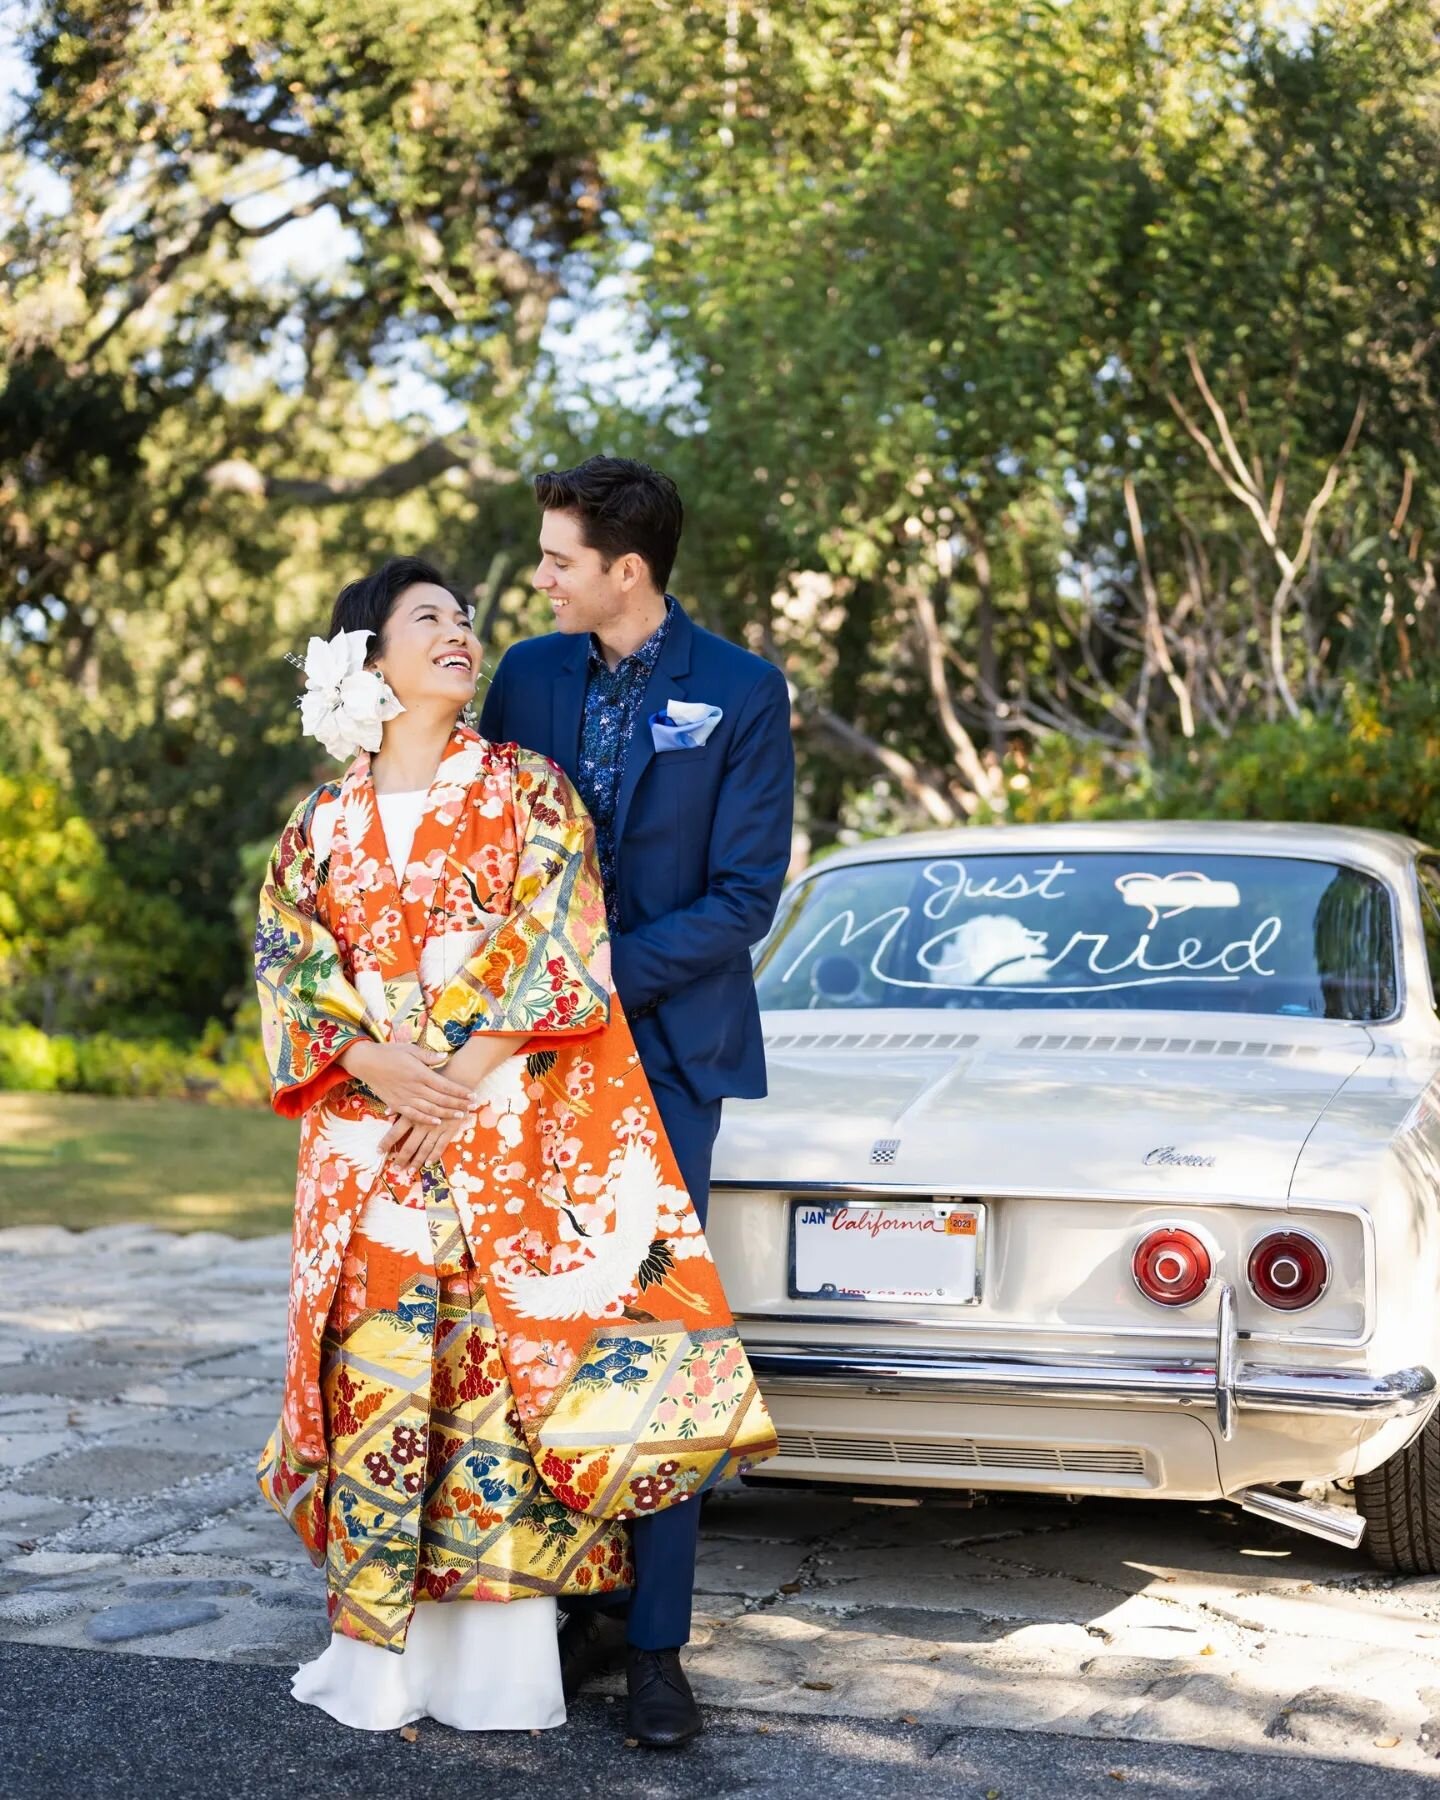 @taylenconcarne and @harmonysol brought out their 1966 Corvair for some photos. Harmony changed into this beautiful vibrant dress for the remaining photos and it's absolutely stunning! 
.
.
.
.
.
#losangelesweddingphotographer #chevroletcorvair #just